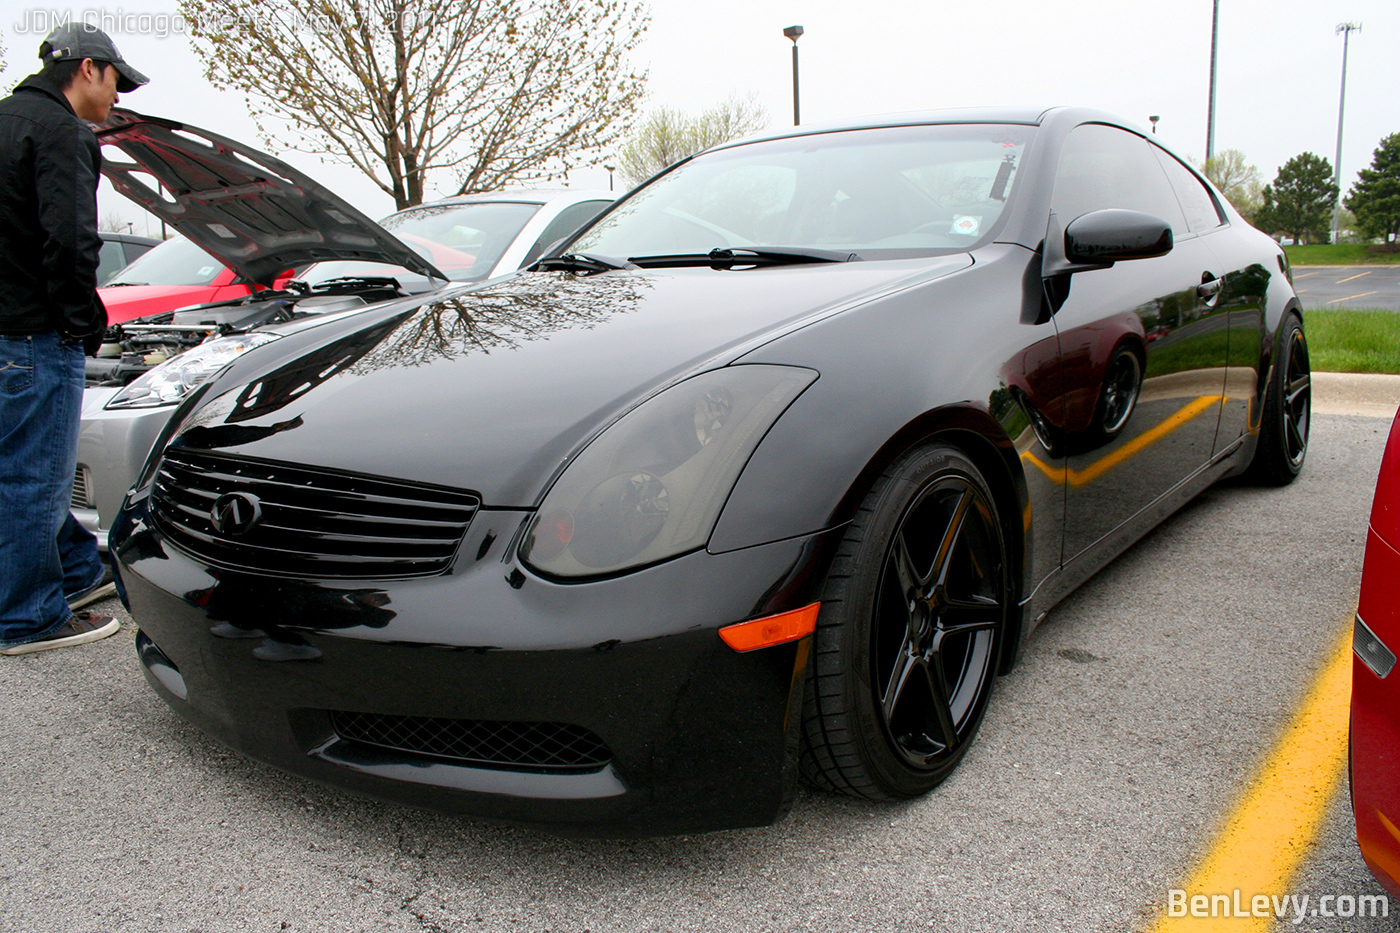 Blacked-out Infiniti G35 Coupe